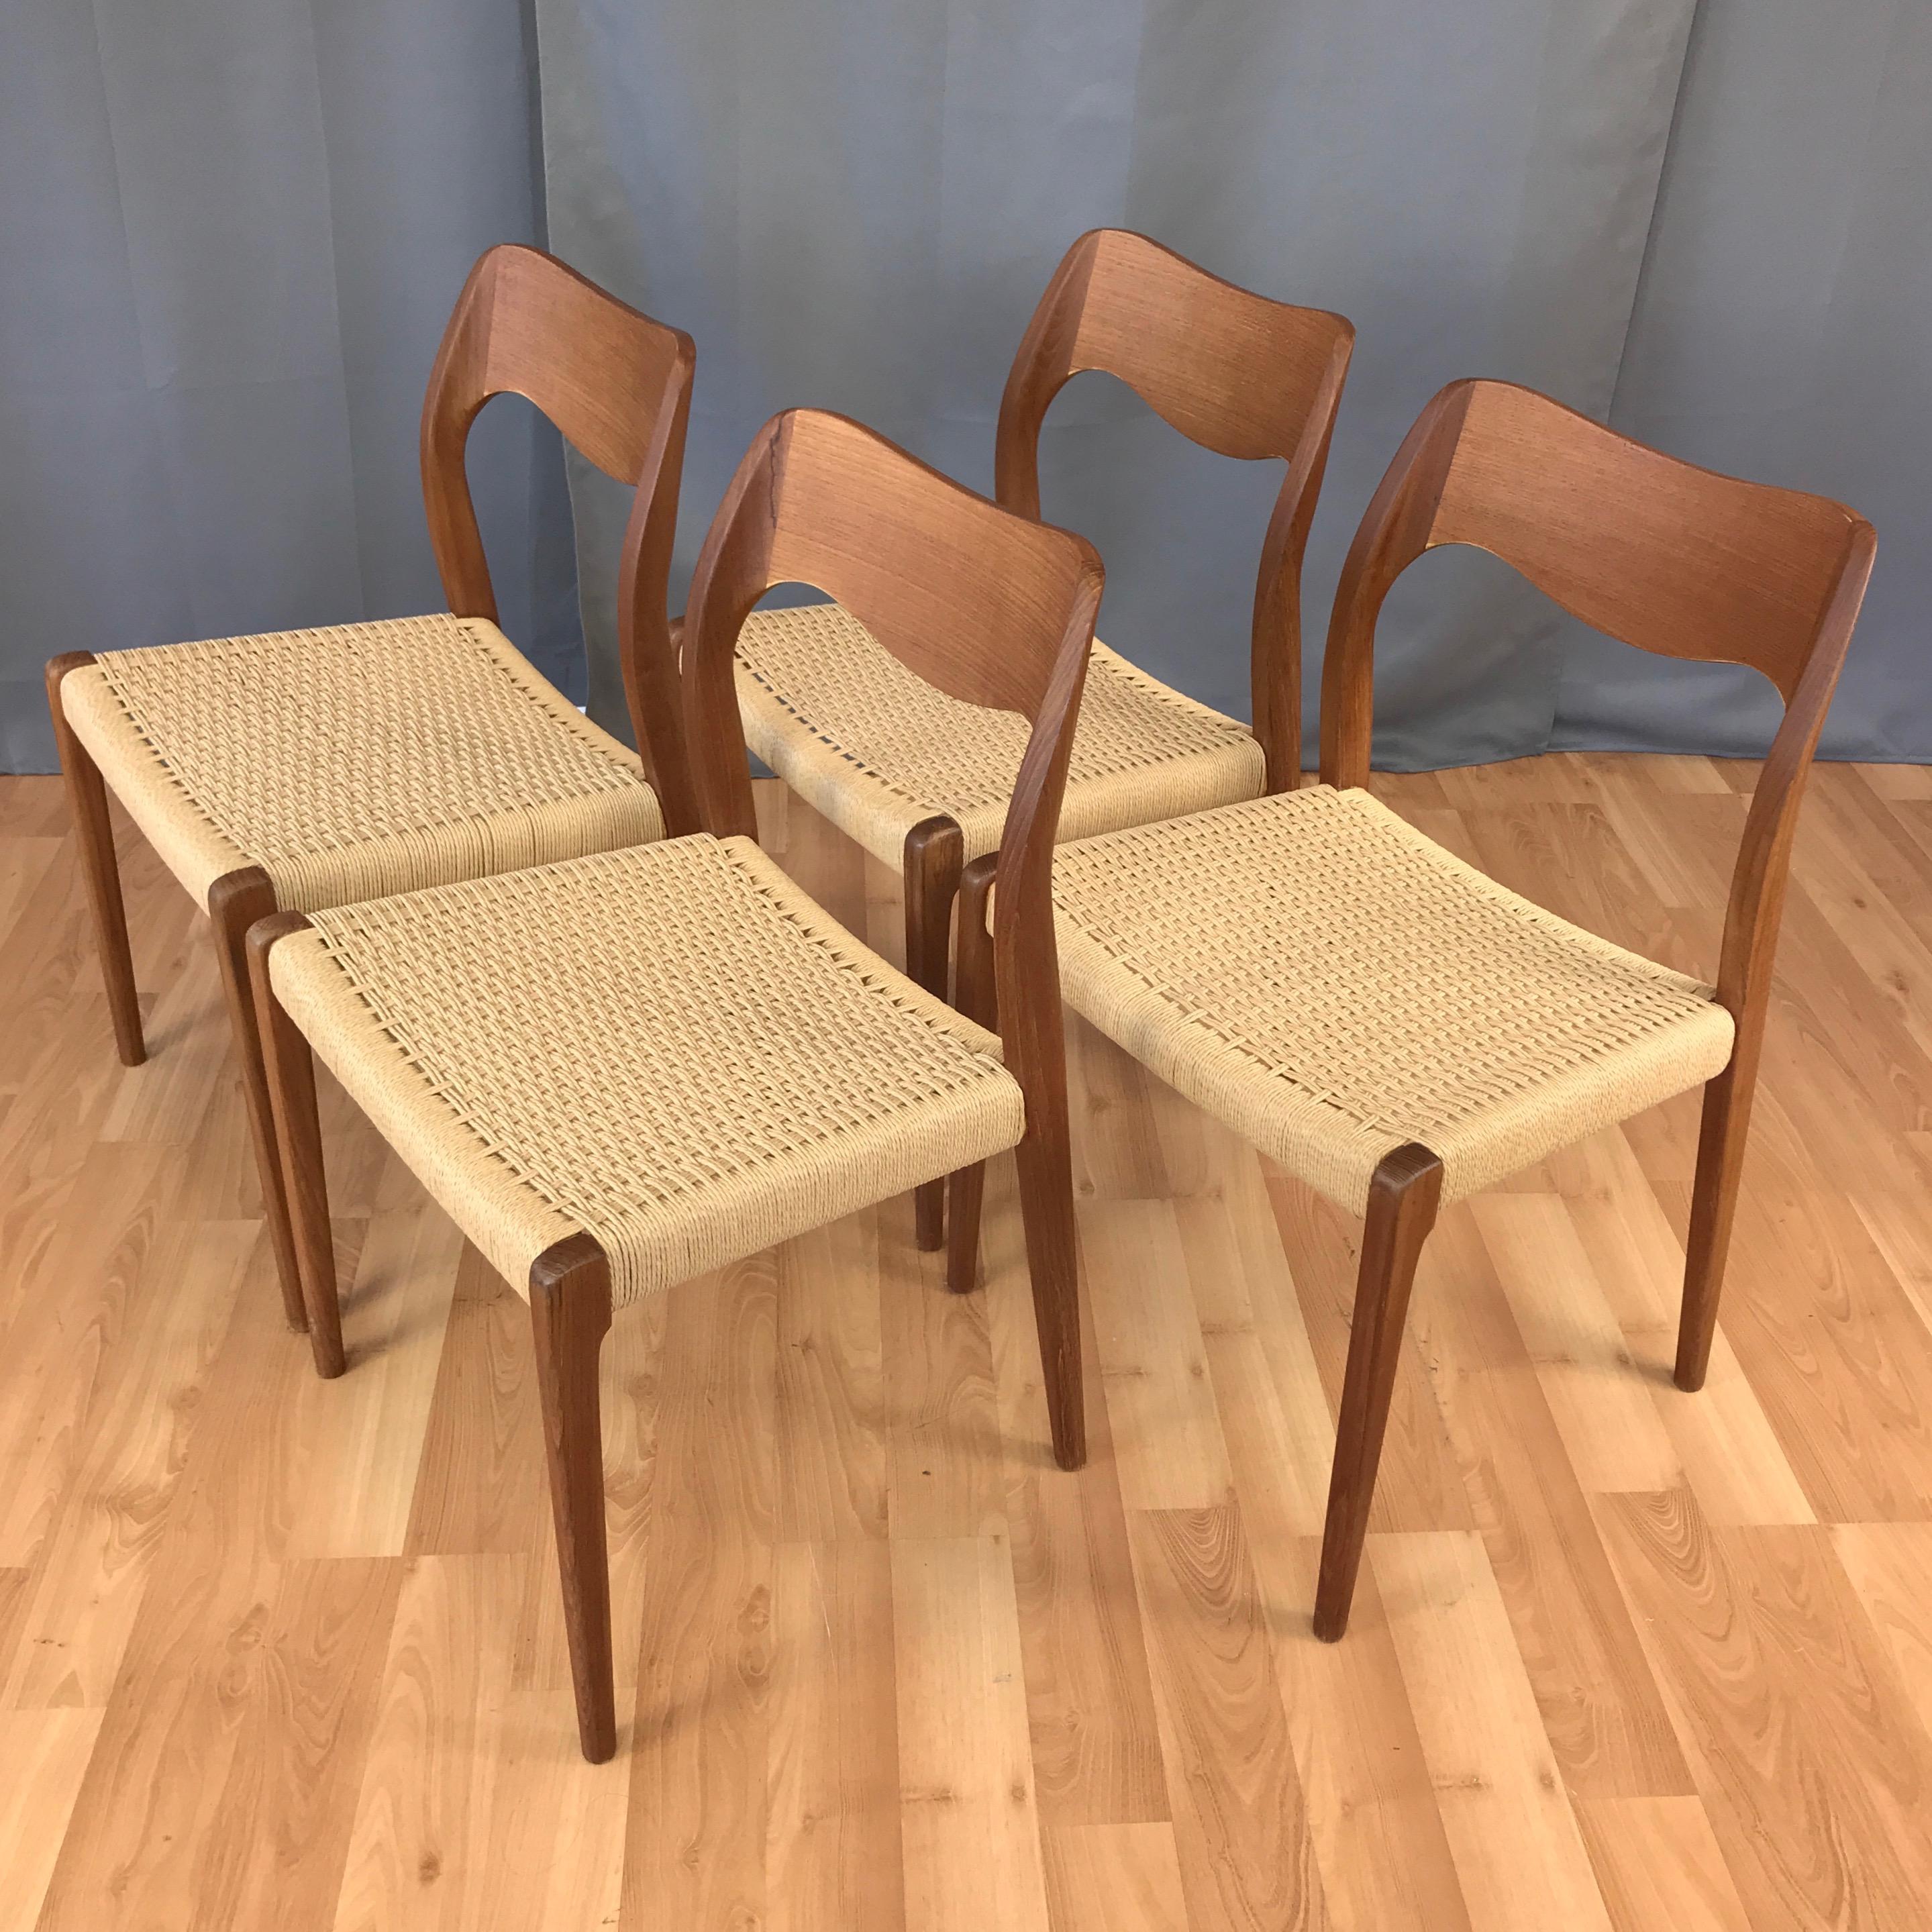 A set of four 1950s model 71 teak dining chairs with papercord seats by Niels Otto Møller for J.L. Møllers Møbelfabrik.

A timeless and essential Danish modern design classic in solid teak with ergonomically sculpted undulating back and new woven